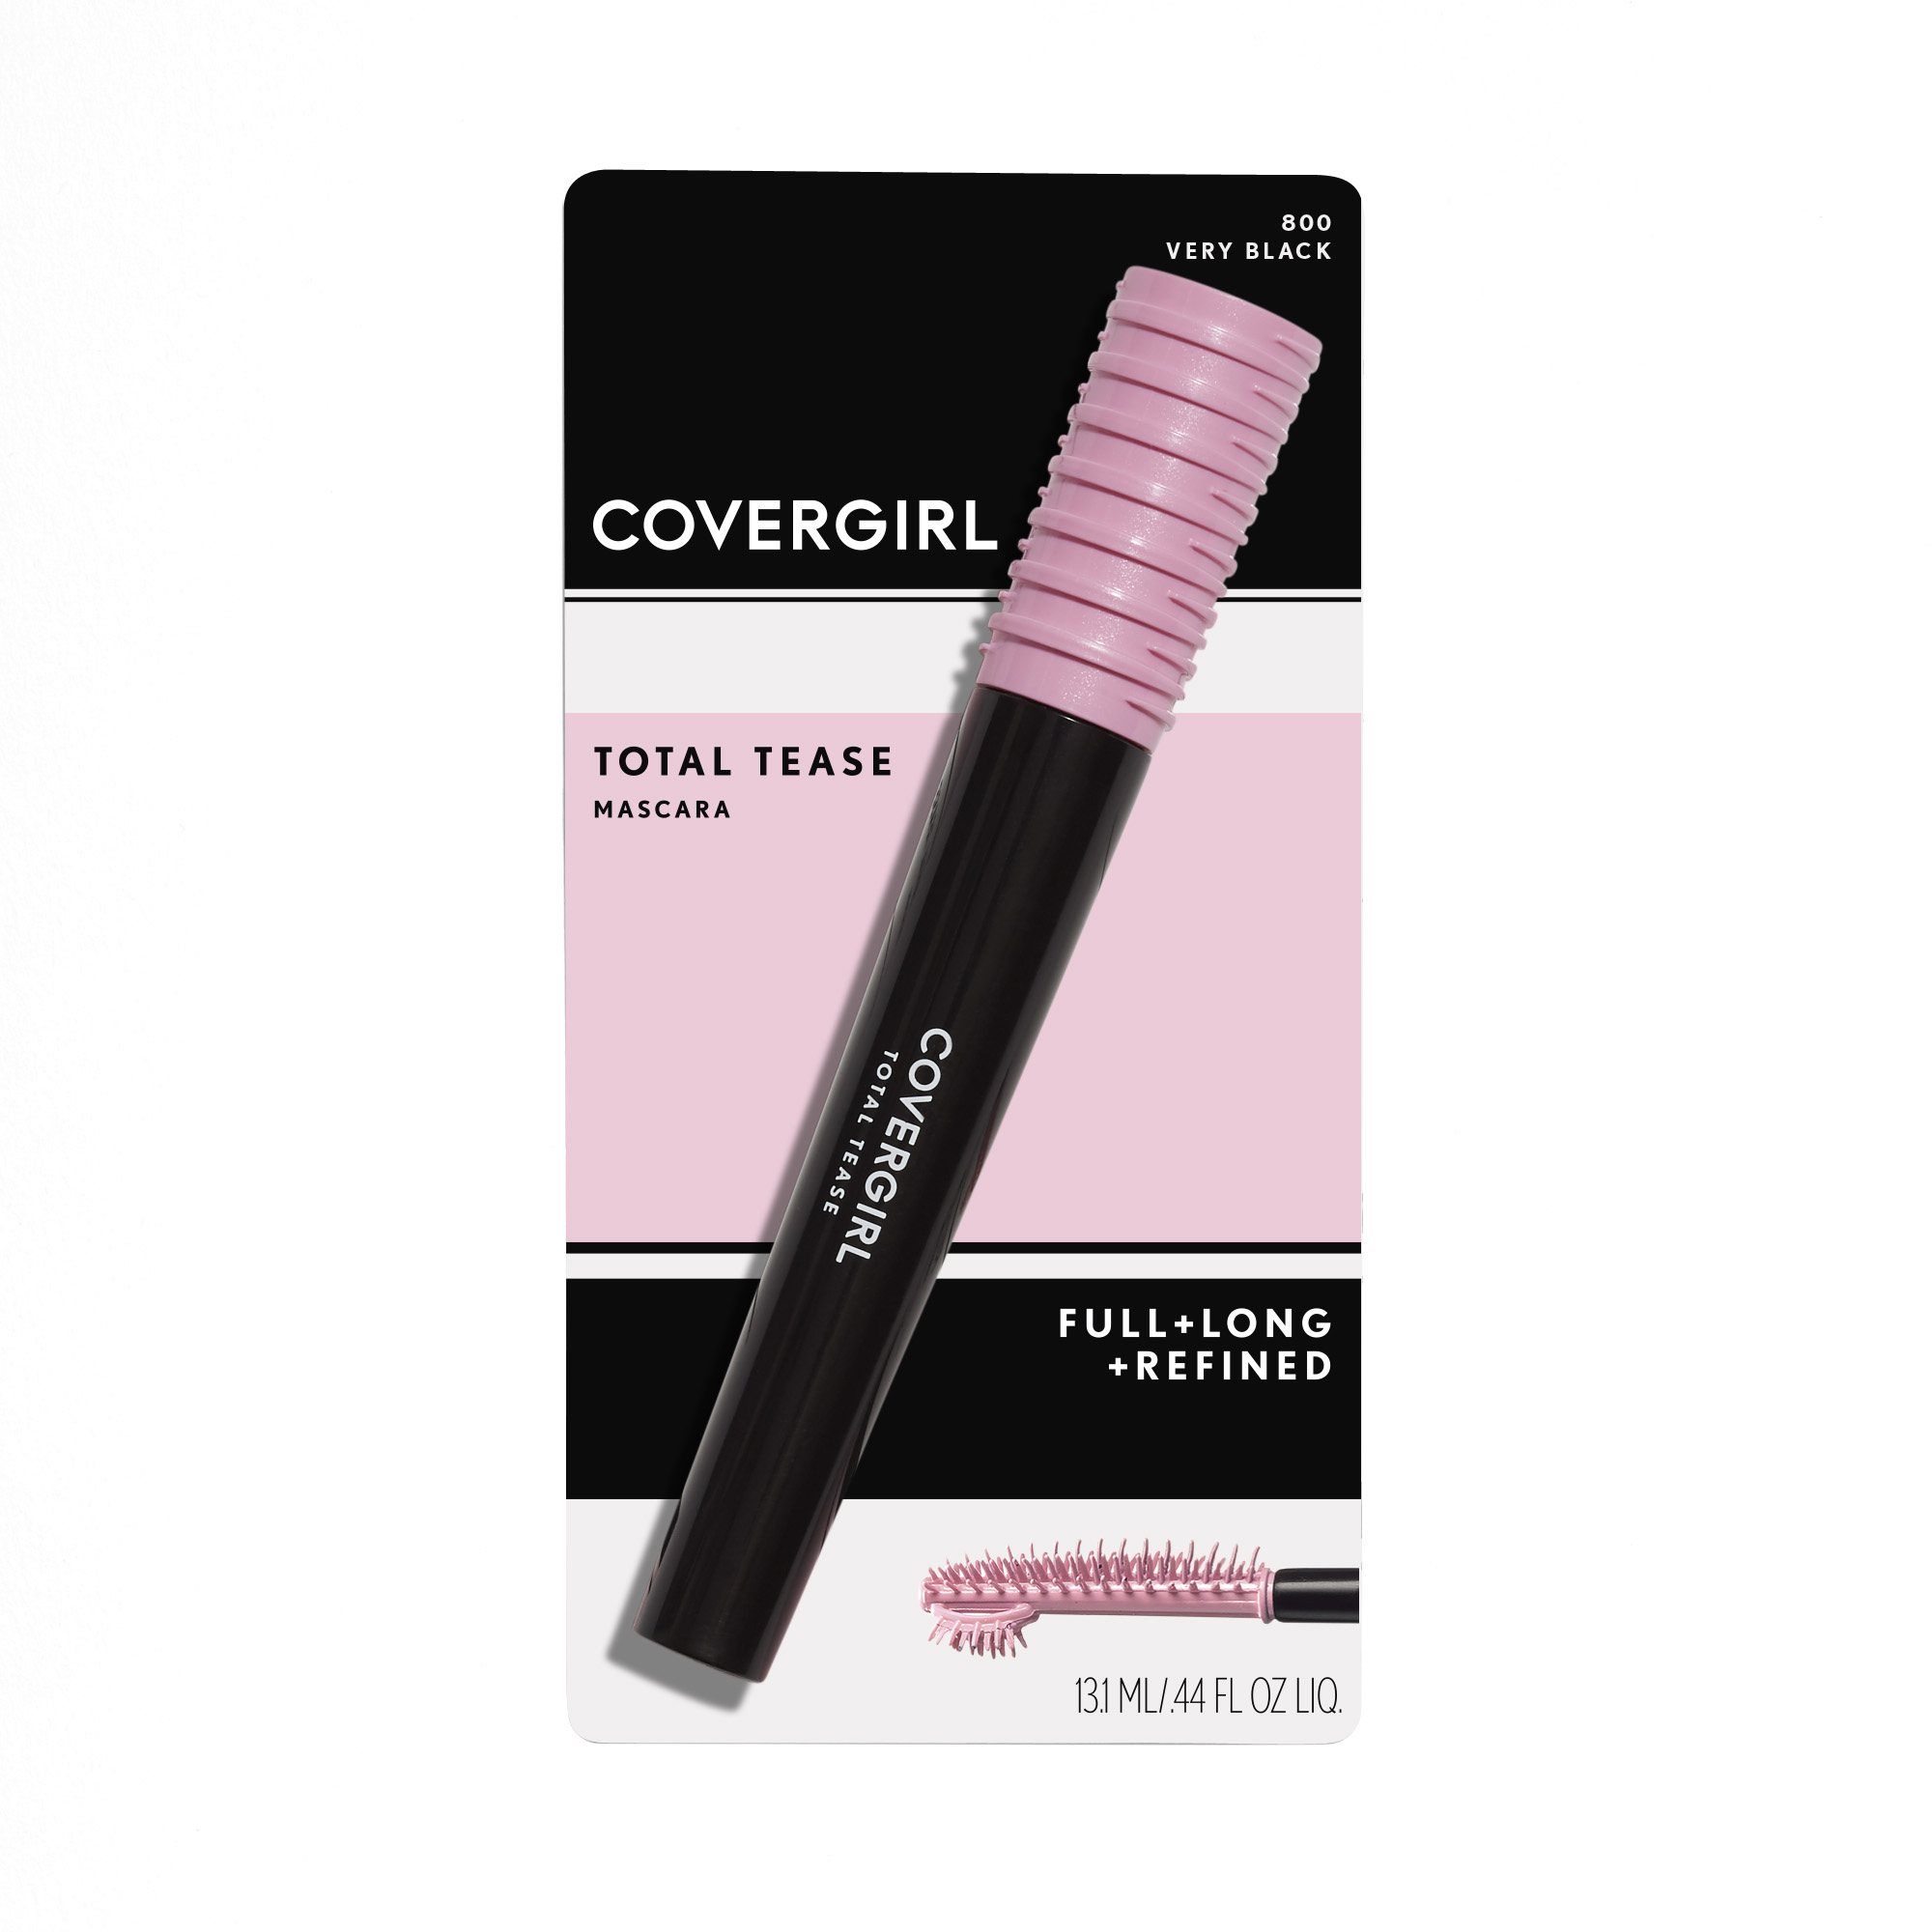 COVERGIRL Total Tease Full + Long + Refined Mascara, 100 Very Black, 0.21 oz - image 3 of 5